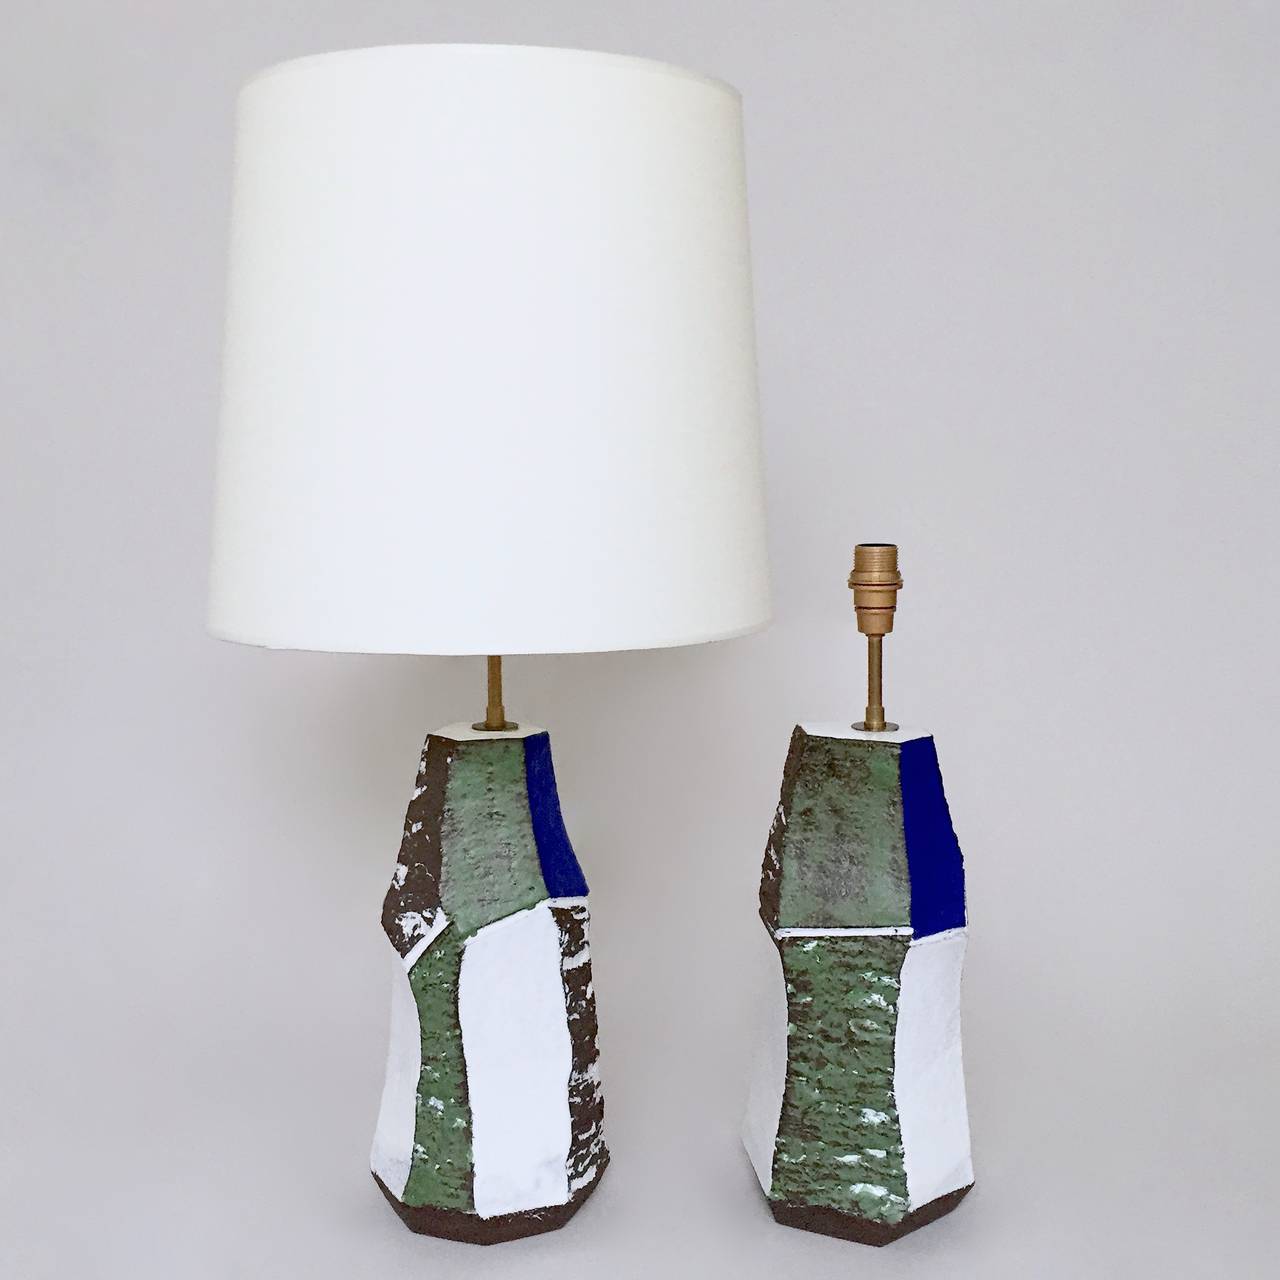 Faceted pair of lamp-bases, stoneware glazed in green, white, blue and matt dark brown.

Uniques pieces hand-sculpted by the french ceramicist : tribute to Serge Poliakoff artwork.

The dimensions approx. are for the ceramic pieces solely :